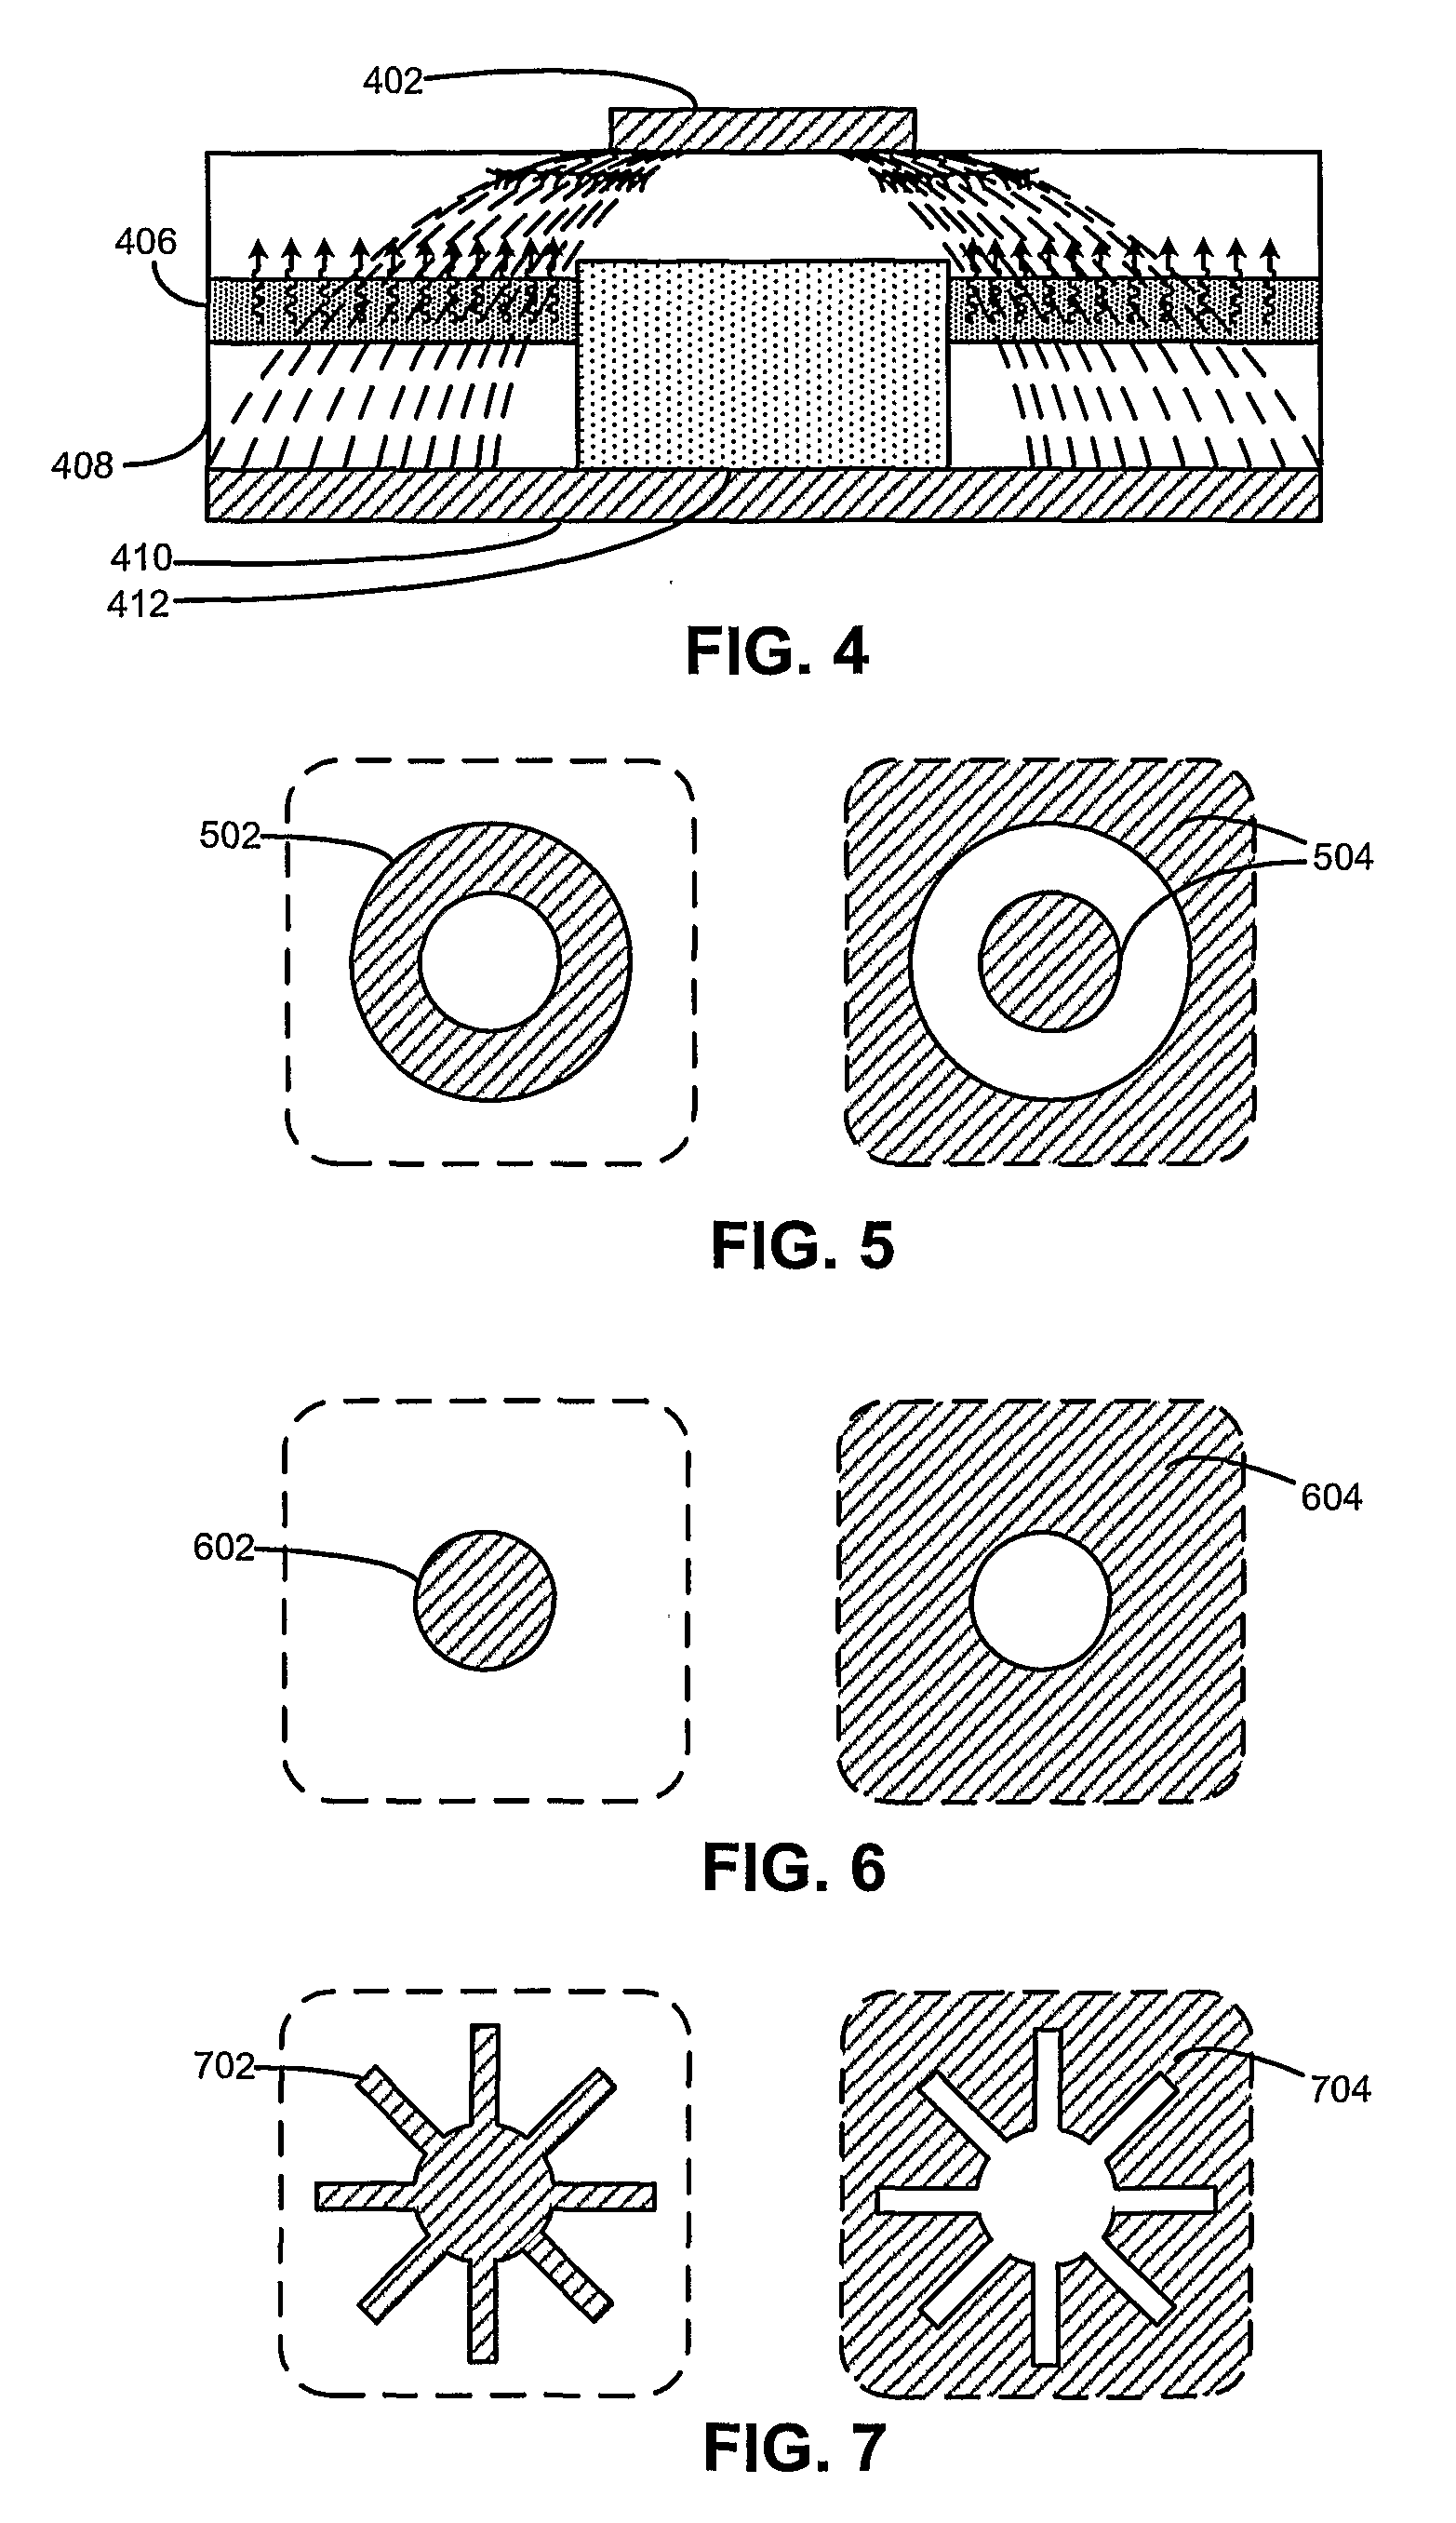 Semiconductor Light-Emitting Device with Electrode for N-Polar Ingaain Surface